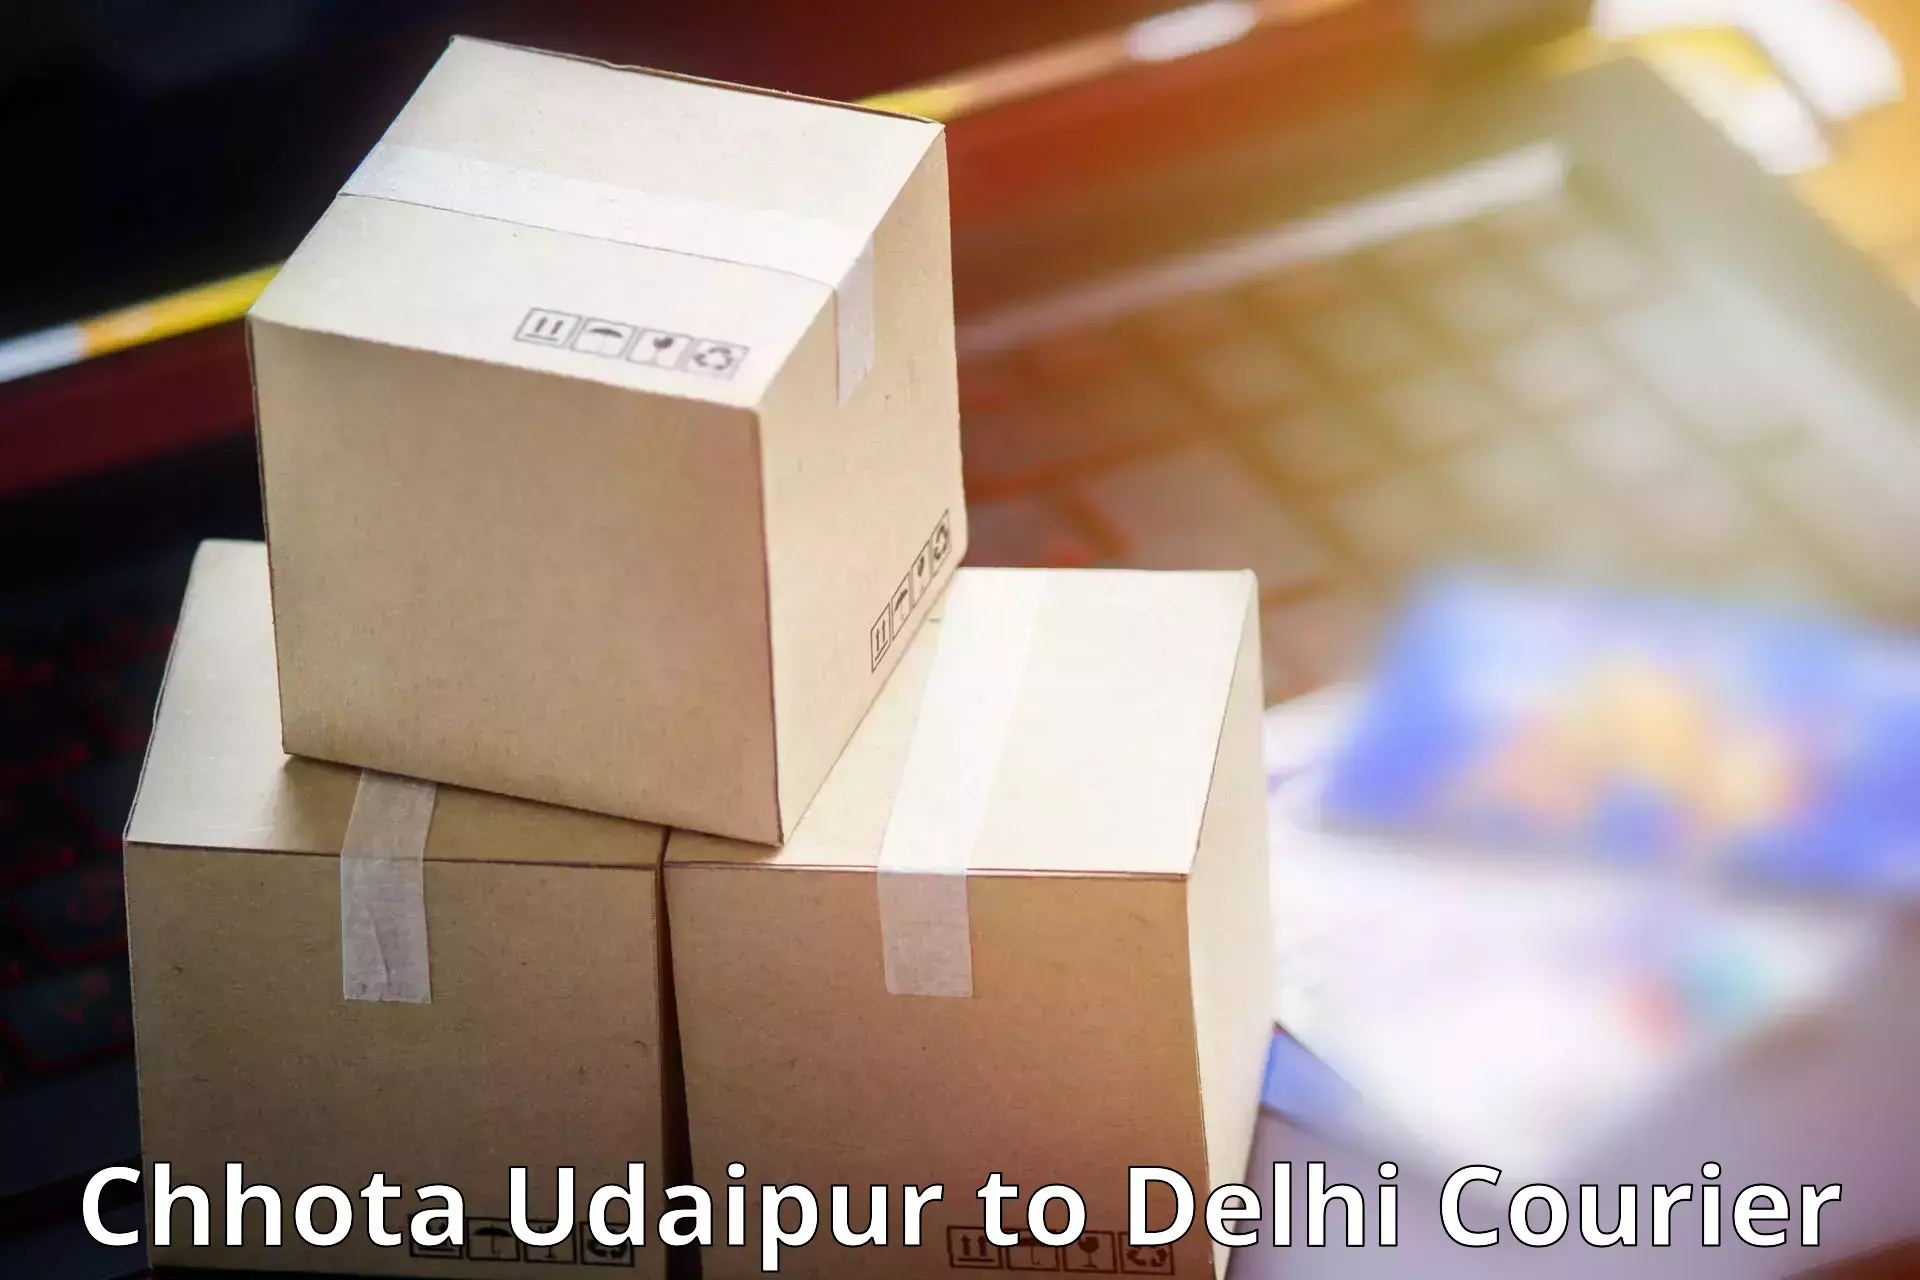 Global courier networks Chhota Udaipur to NIT Delhi